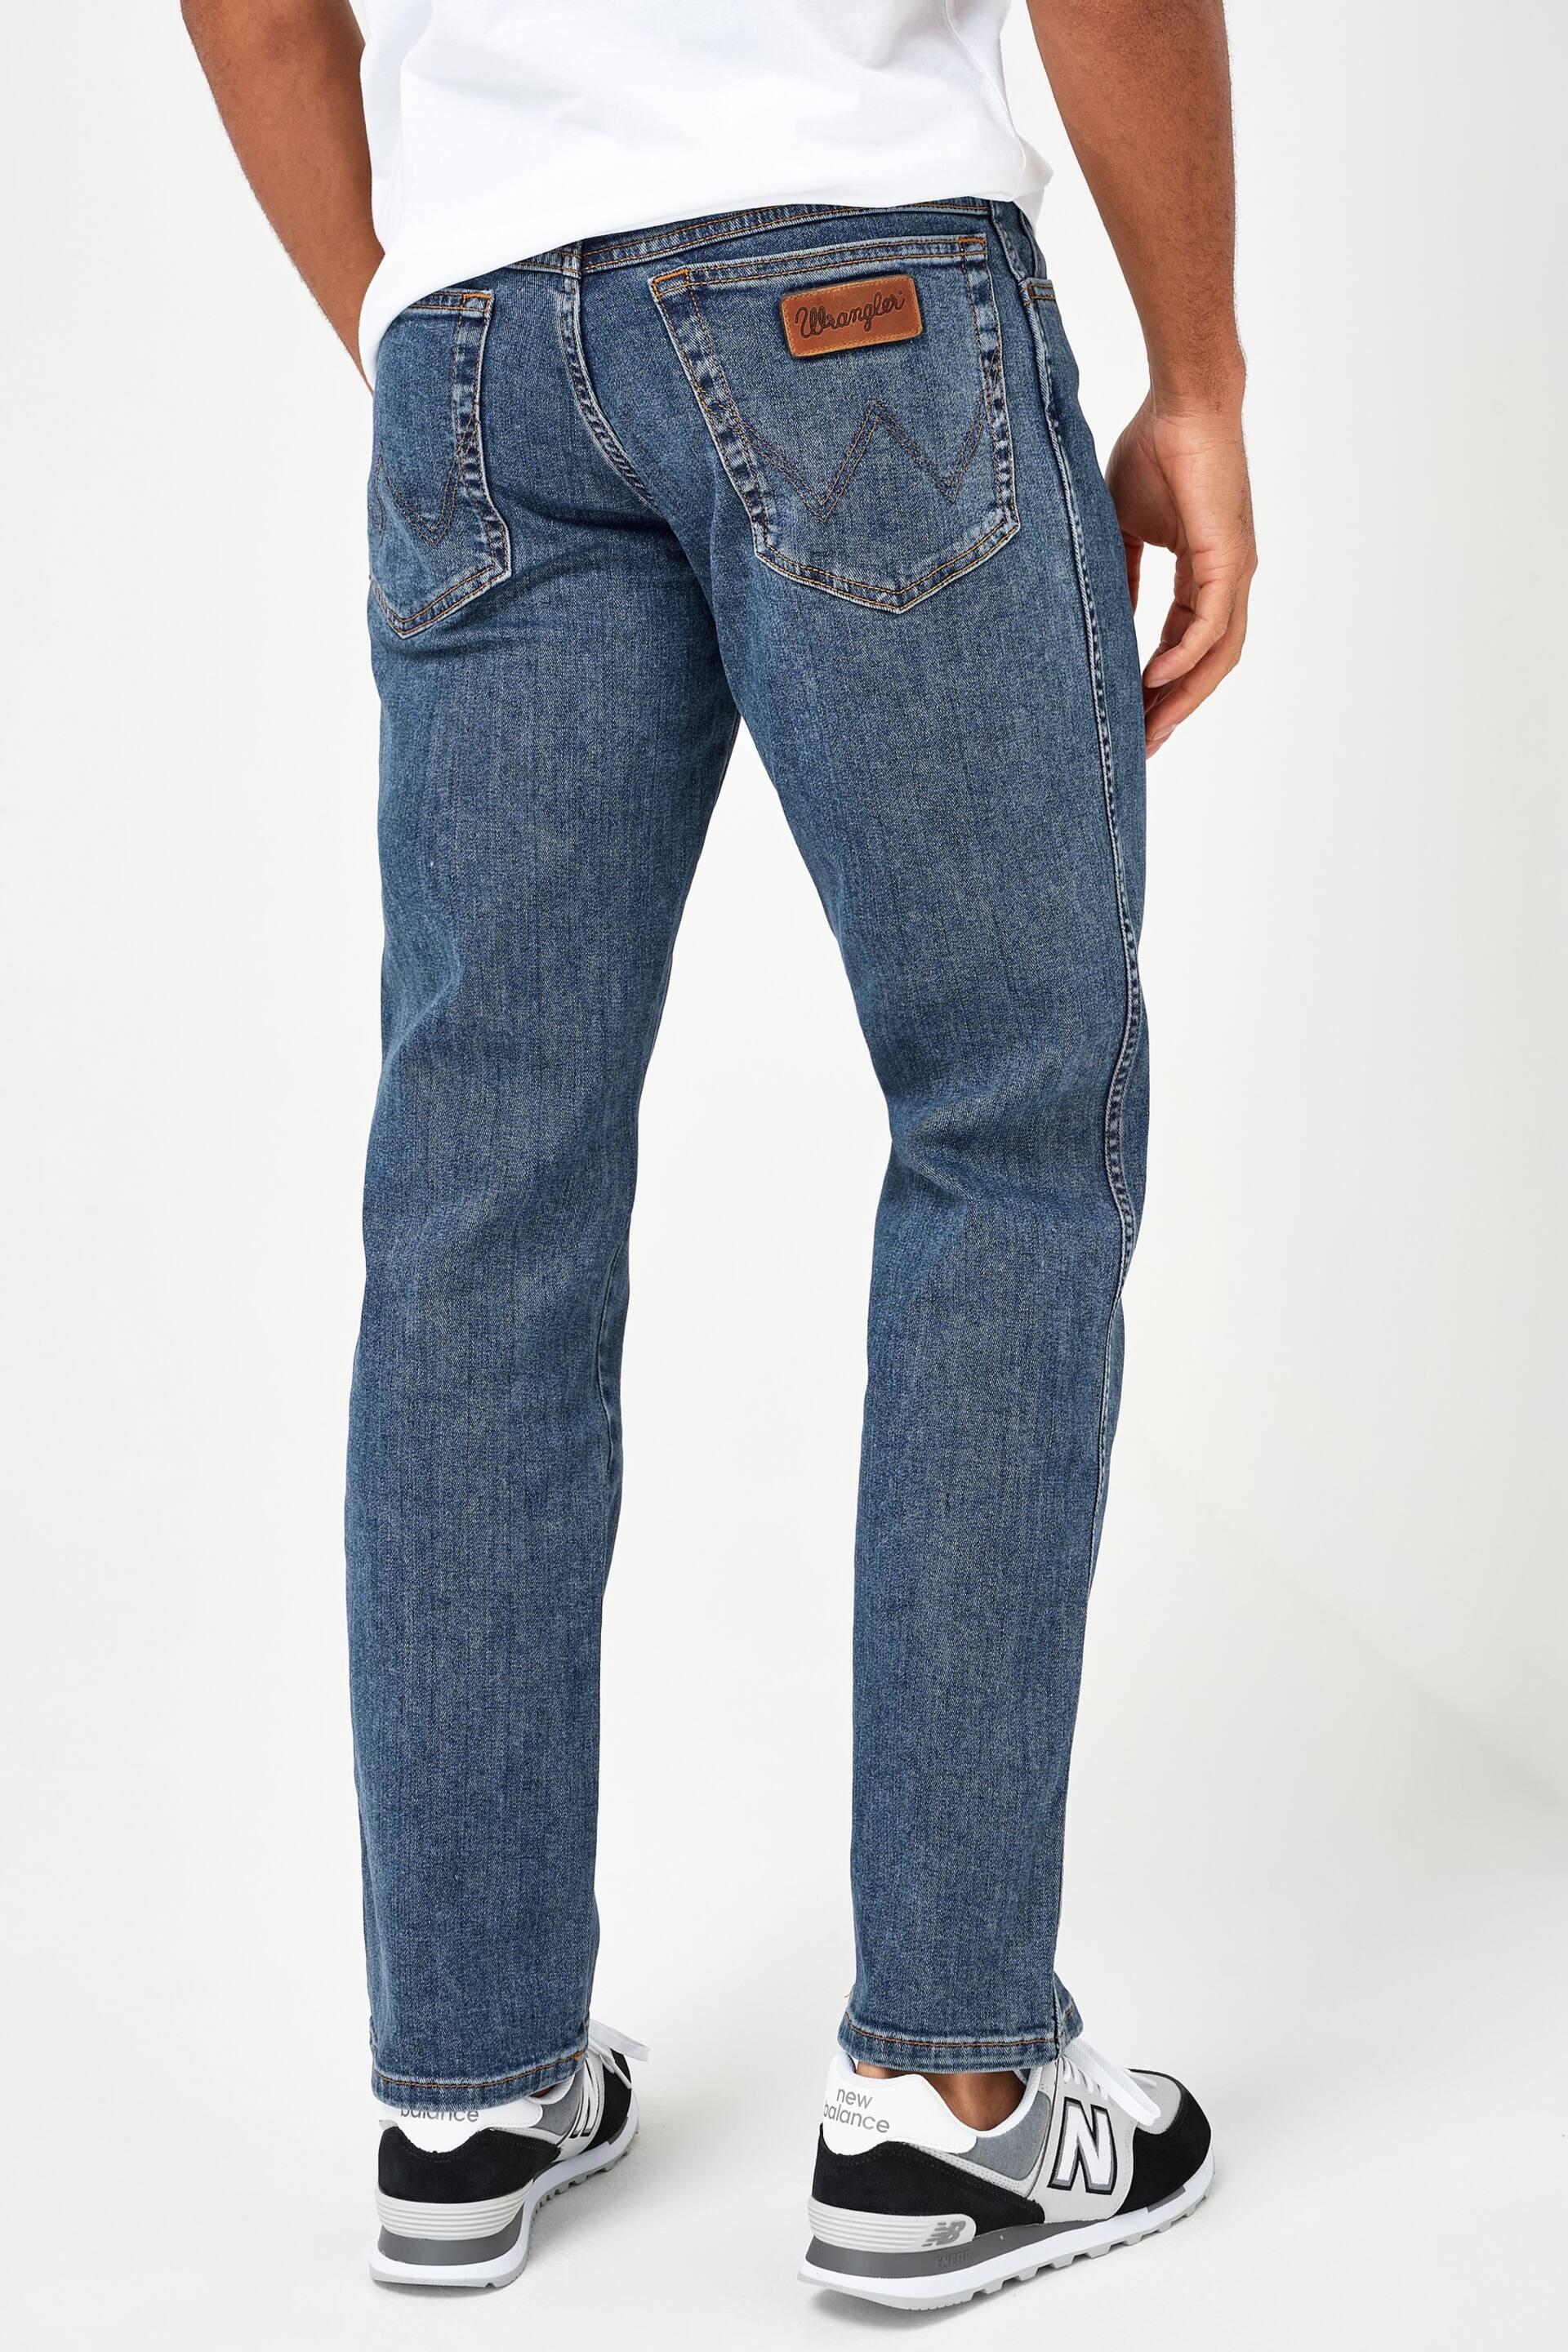 Wrangler Texas Authentic Straight Fit Jeans - Image 2 of 5